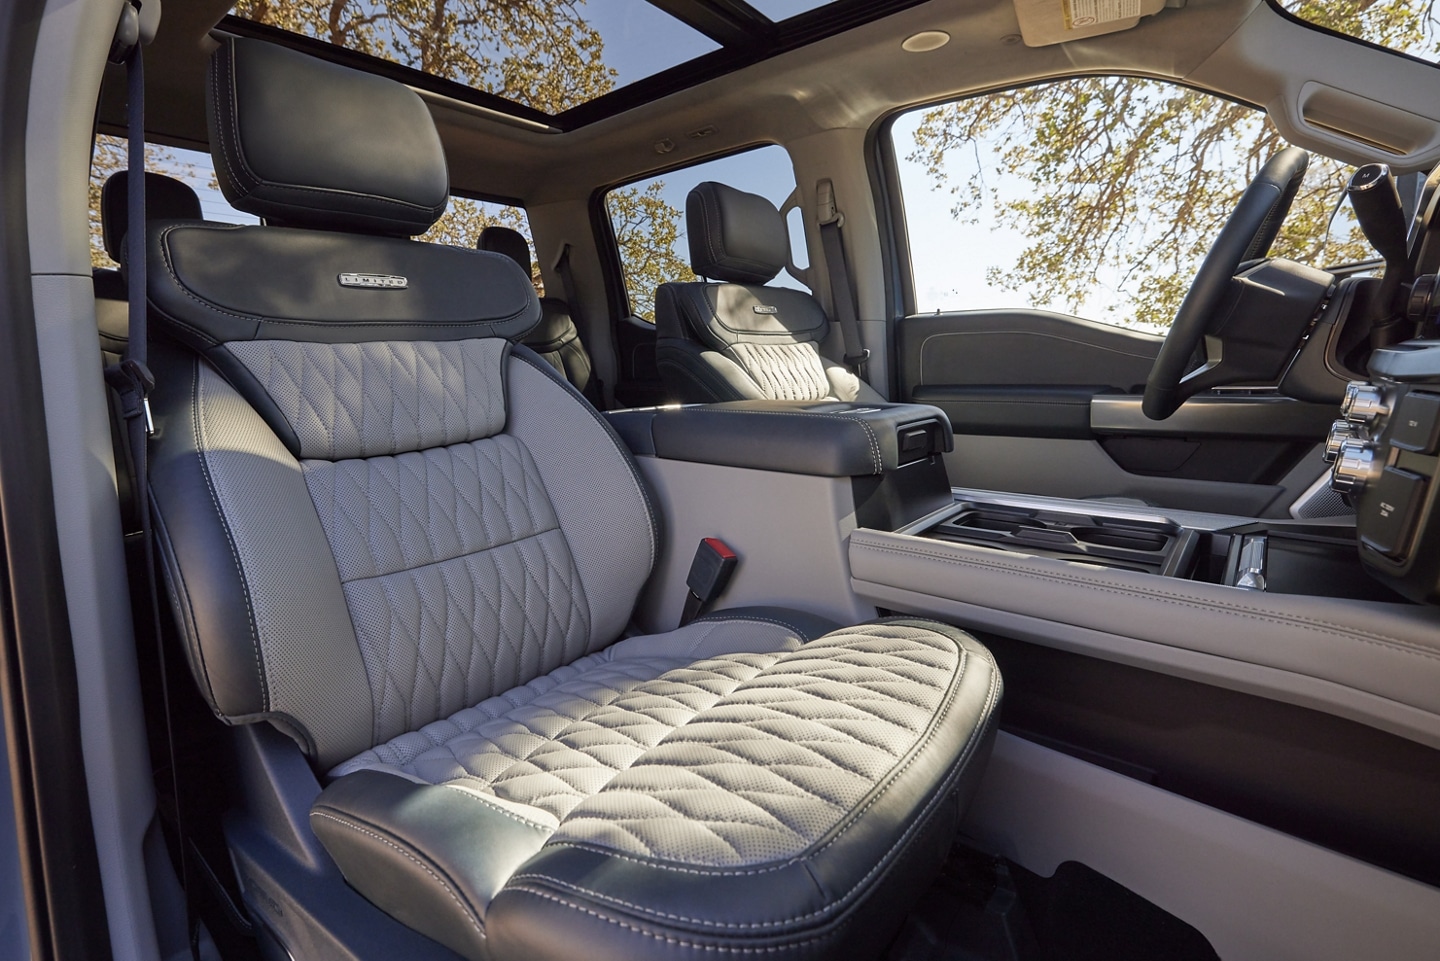 2024 Ford Super Duty Limited Amdiral Blue/Light Slate premium two-toned leather seats.